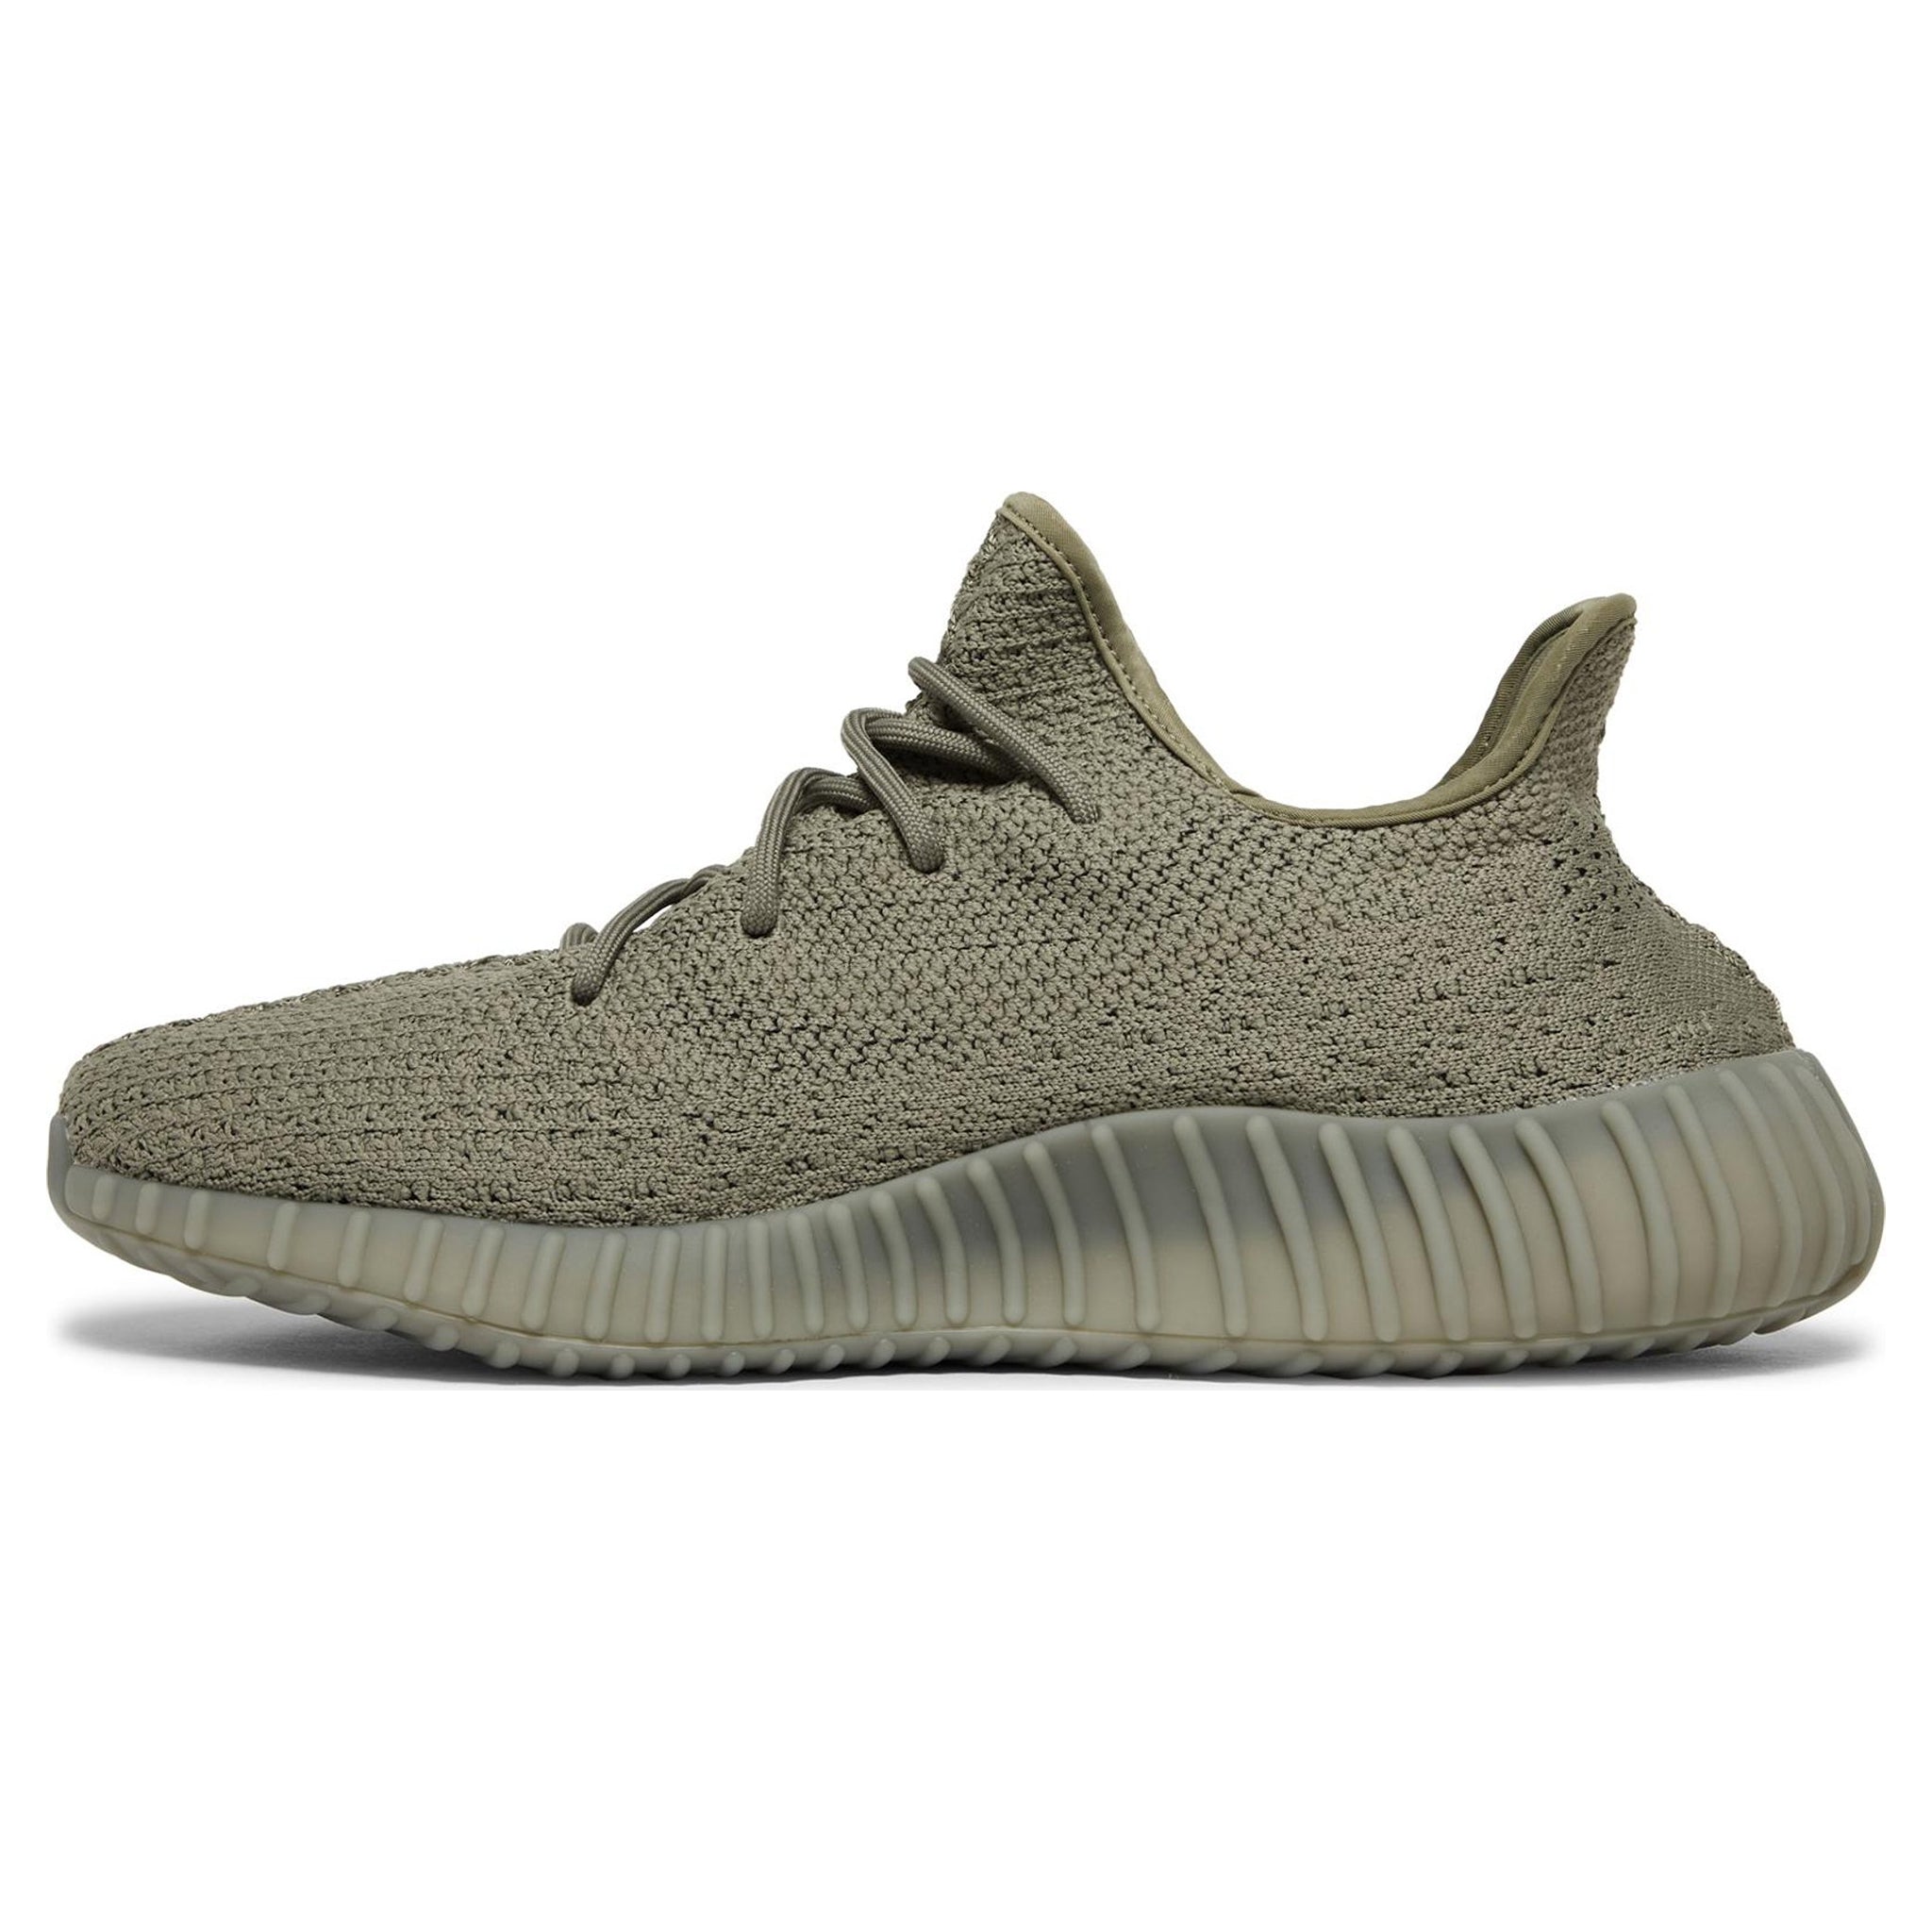 Front side view of Adidas Yeezy Boost 350 V2 Granite HQ2059